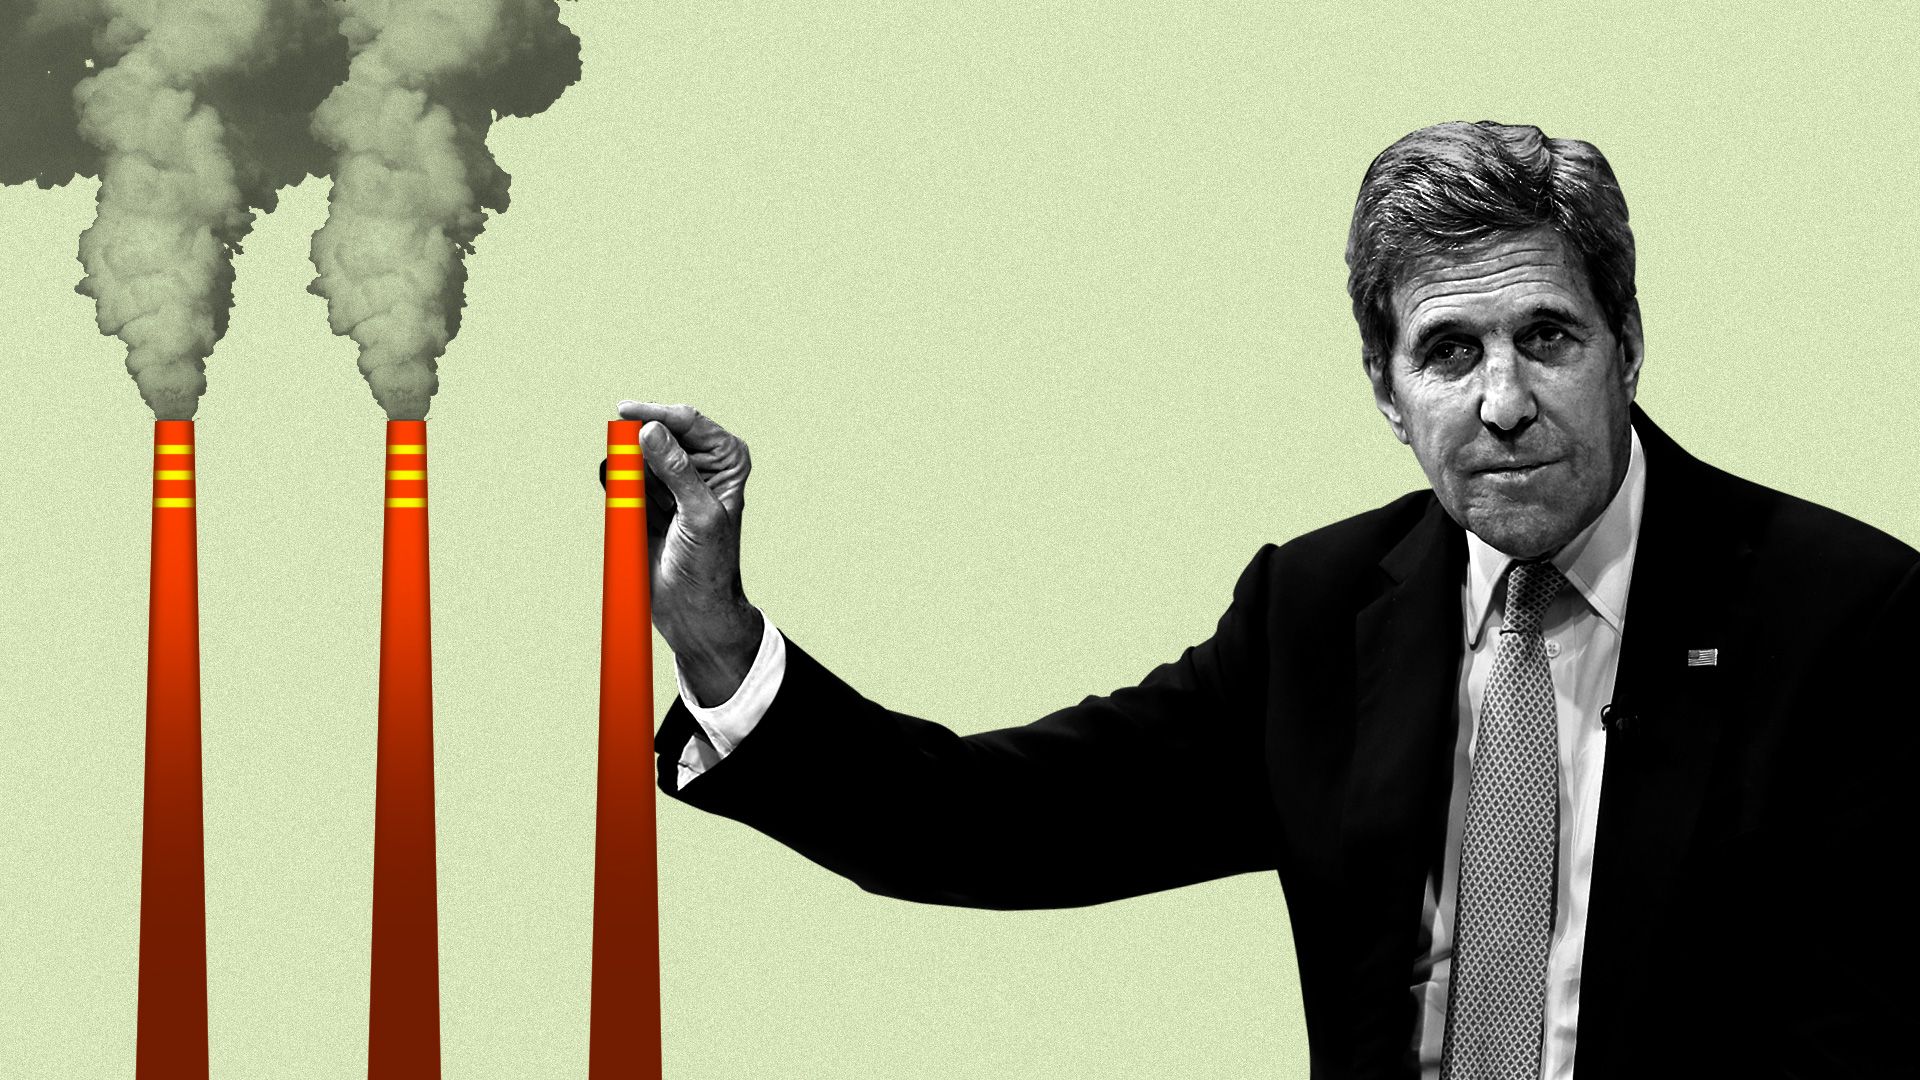 John Kerry plugging a smokestack with his finger